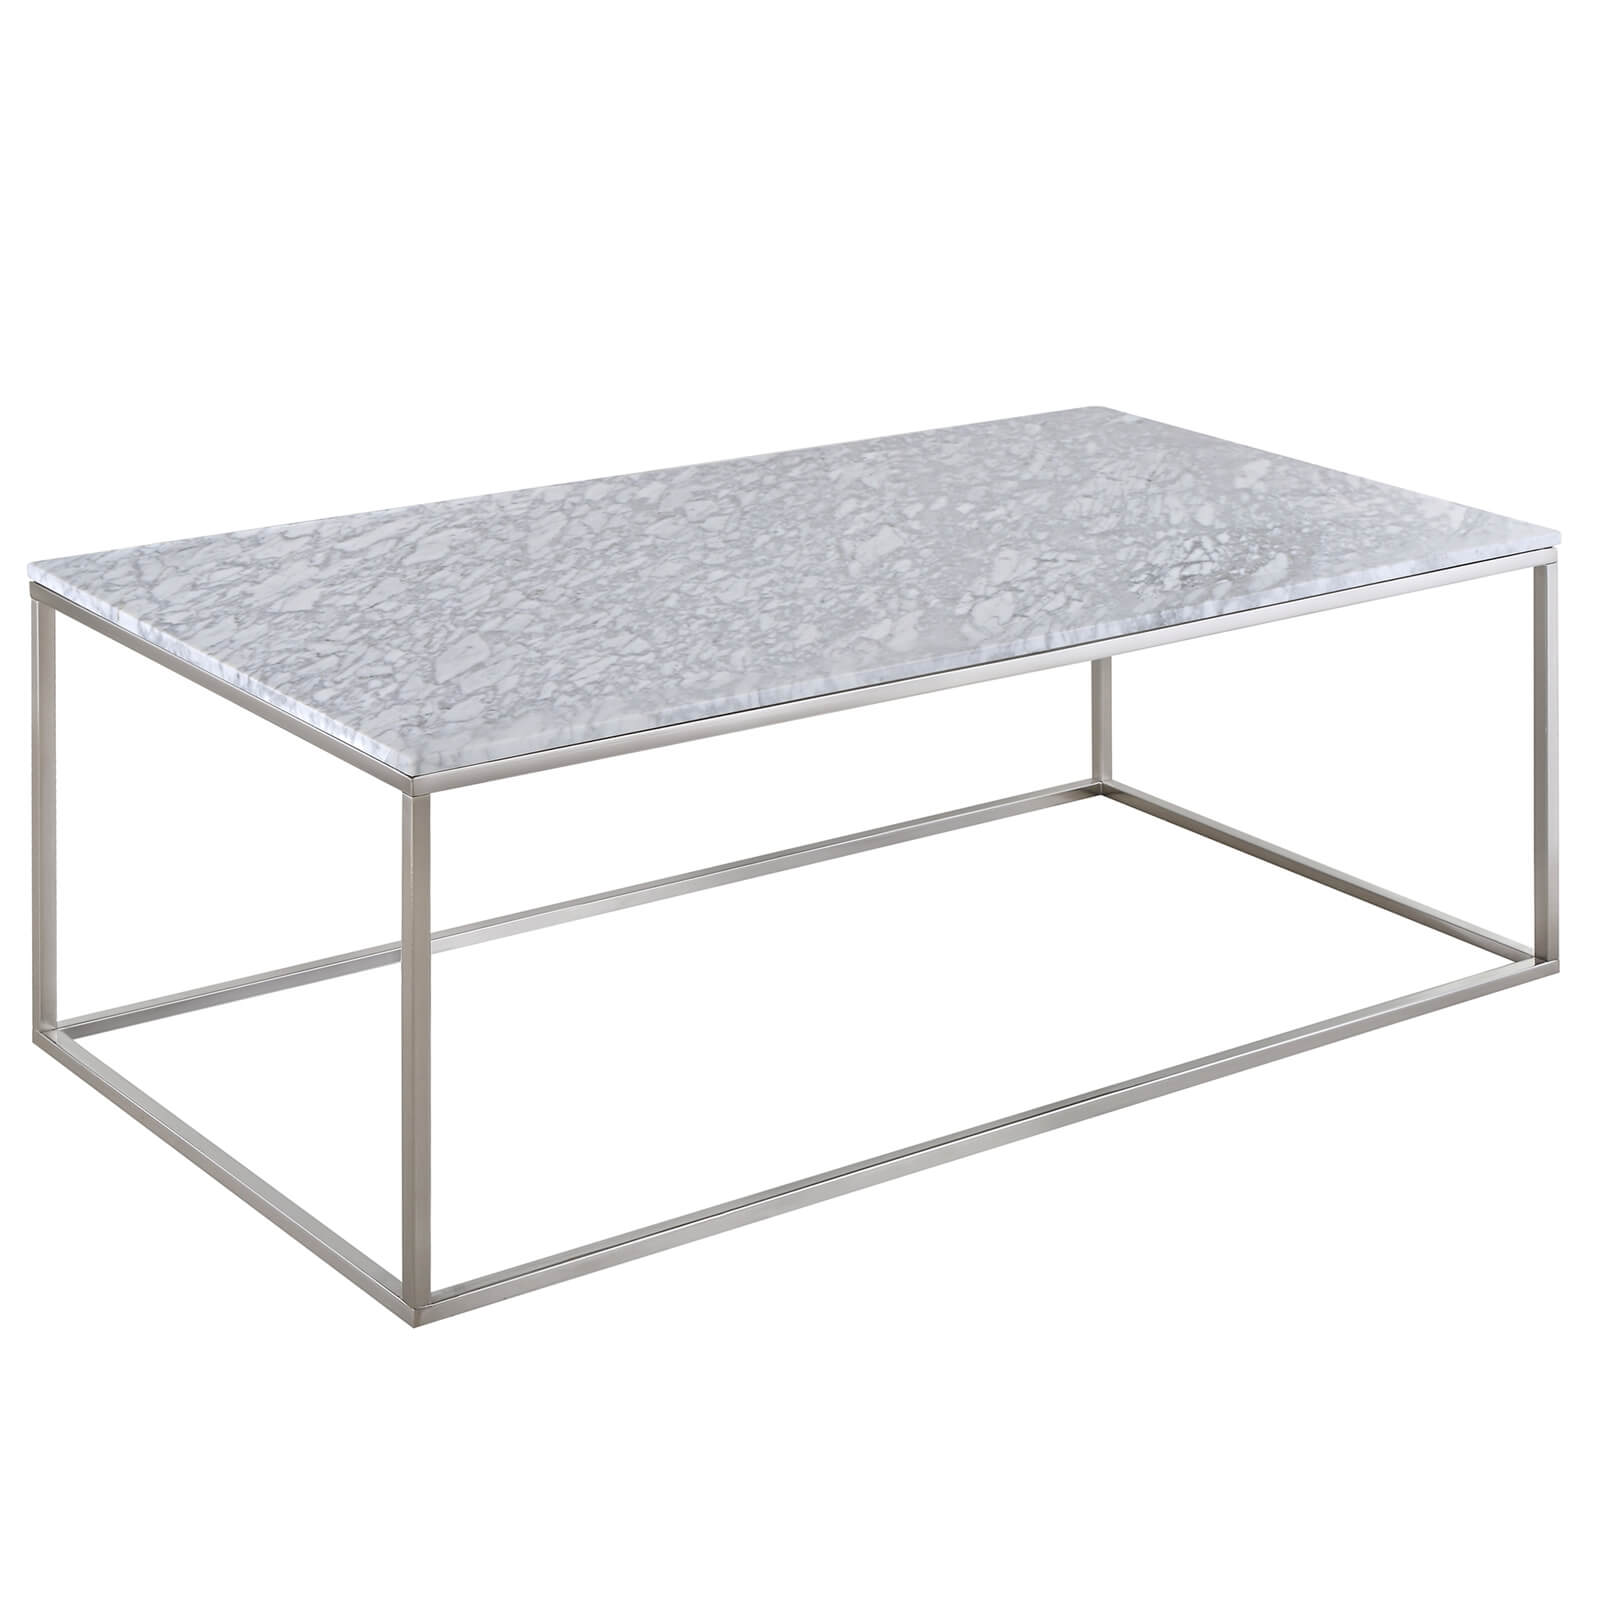 Signet Coffee Table - White Marble & Nickel